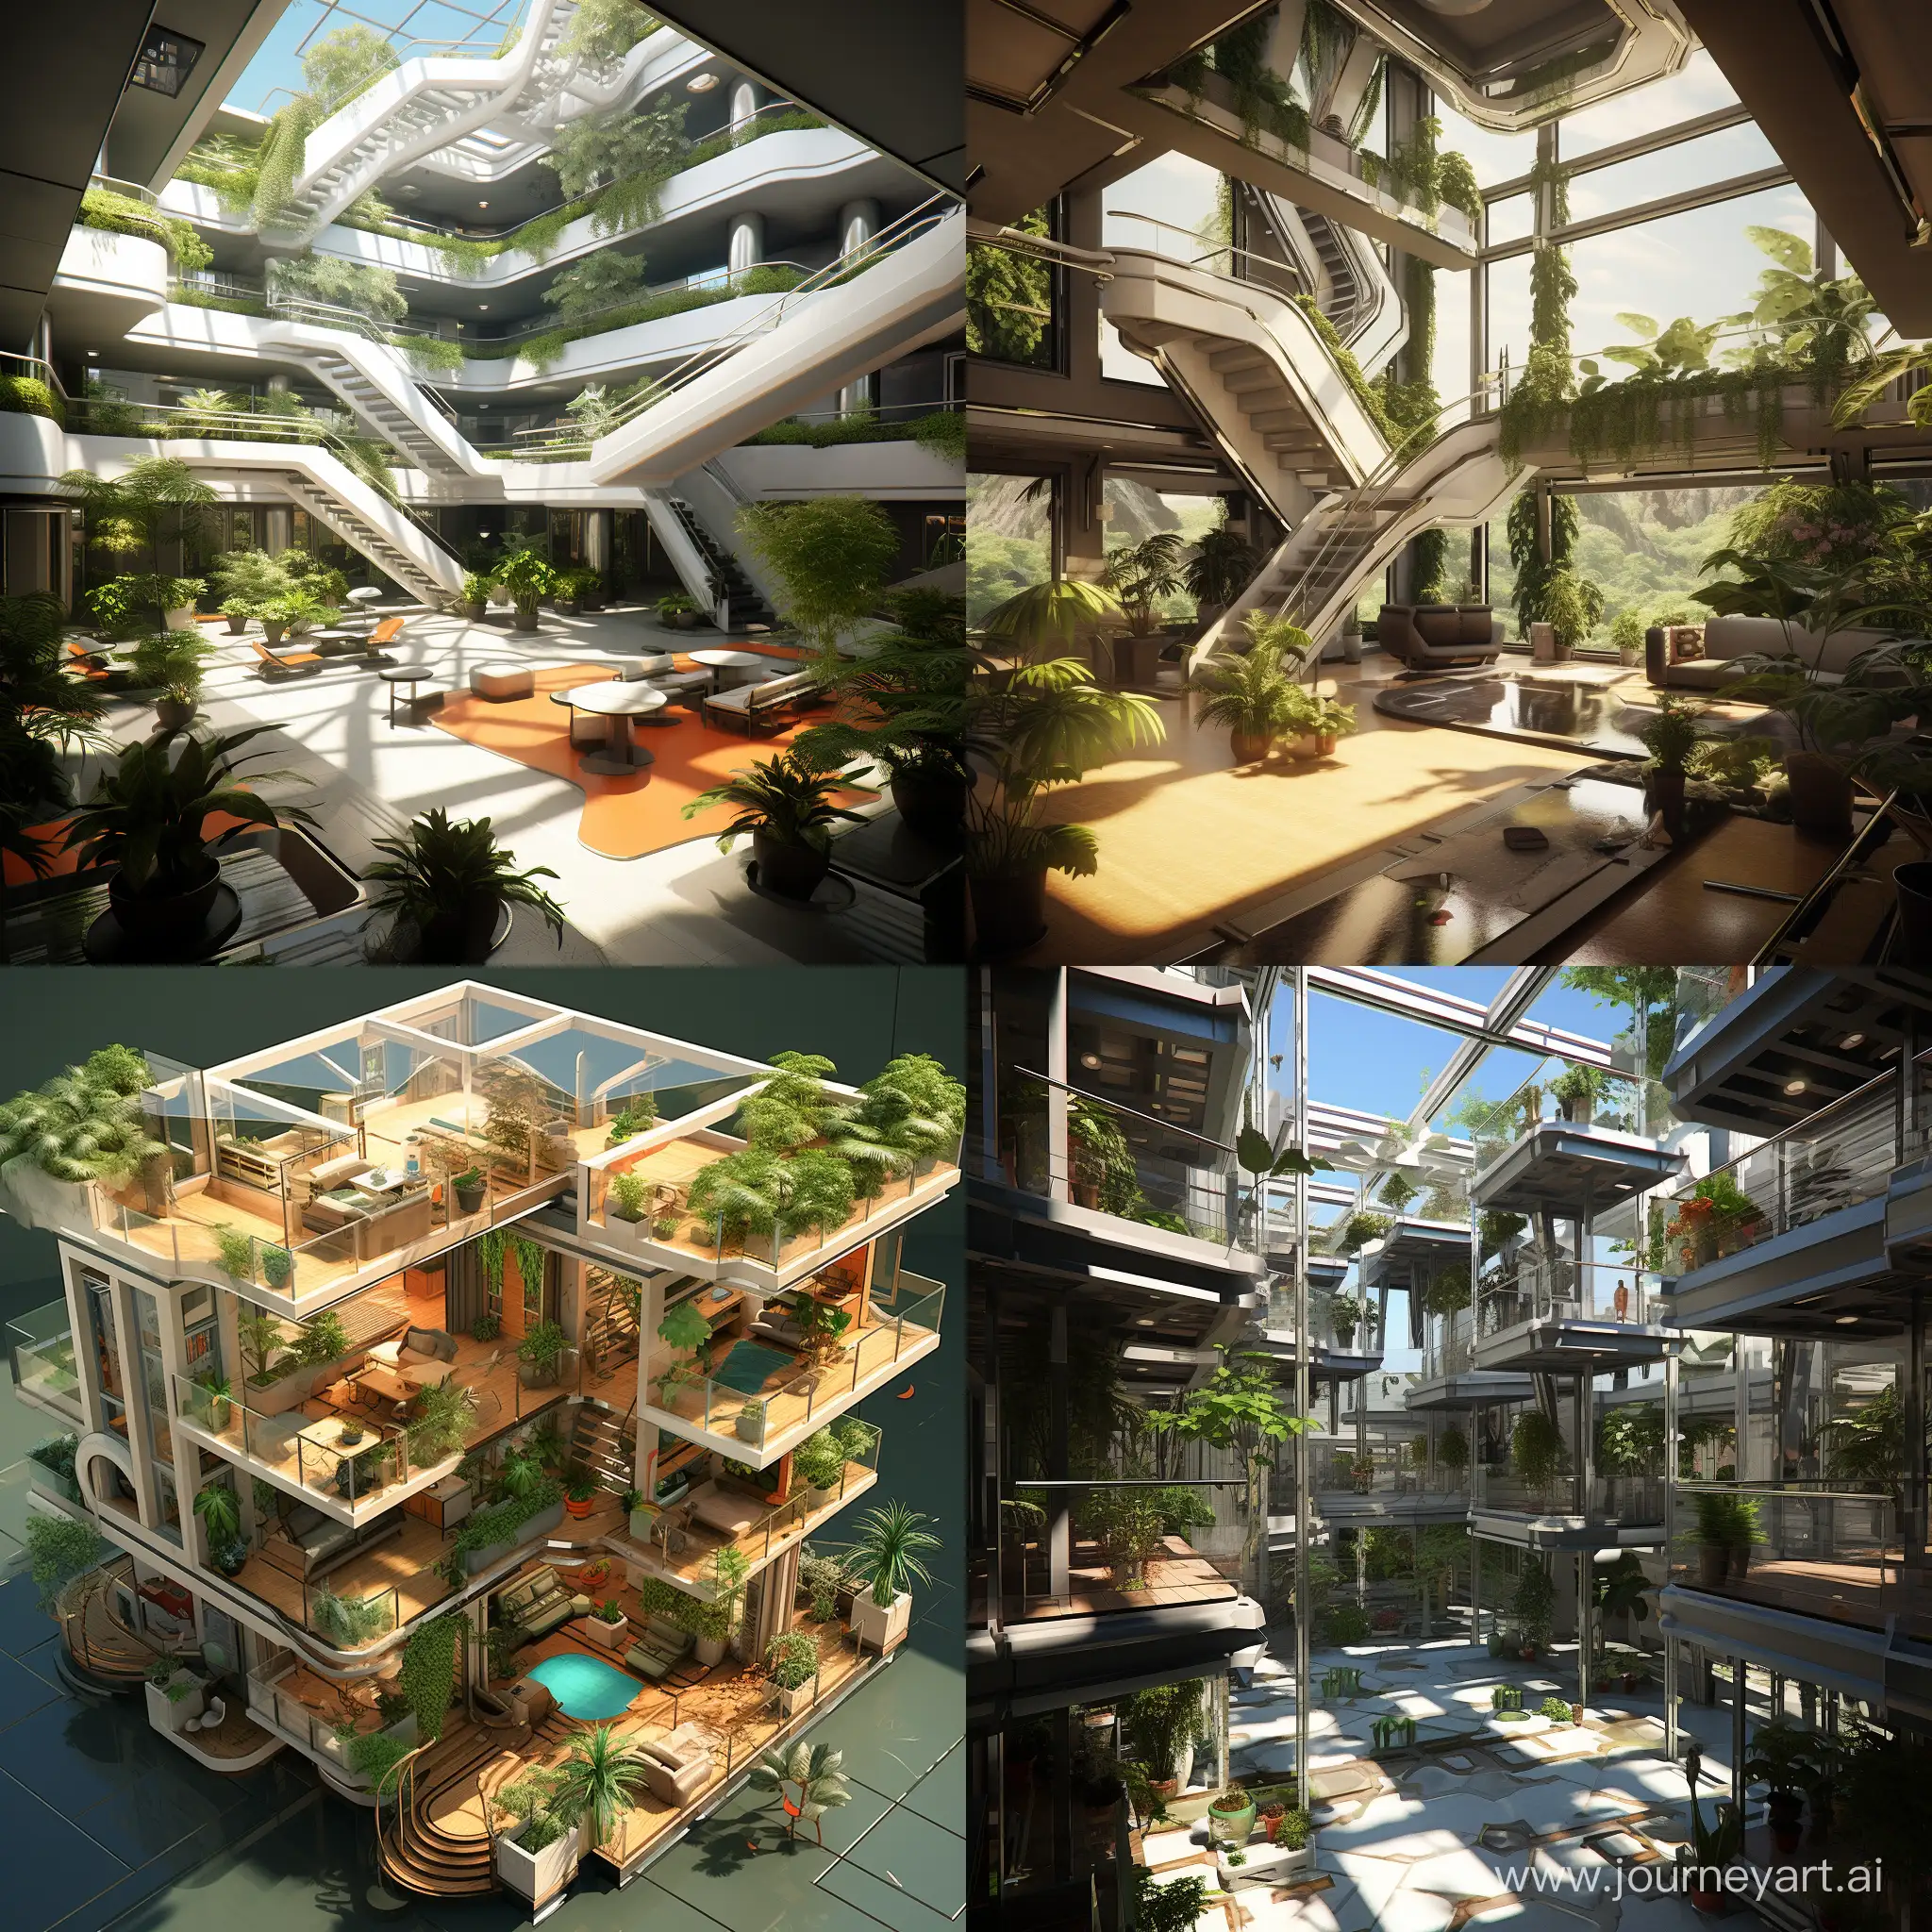 make a 4 floor small building with atrium open to sky and the atrium is connected with outside through high glass windows, atrium consists of lots of plants unique design with different level slab coming out of each floor with plants vertical and horizontal  a furturistic design with beams on each floor